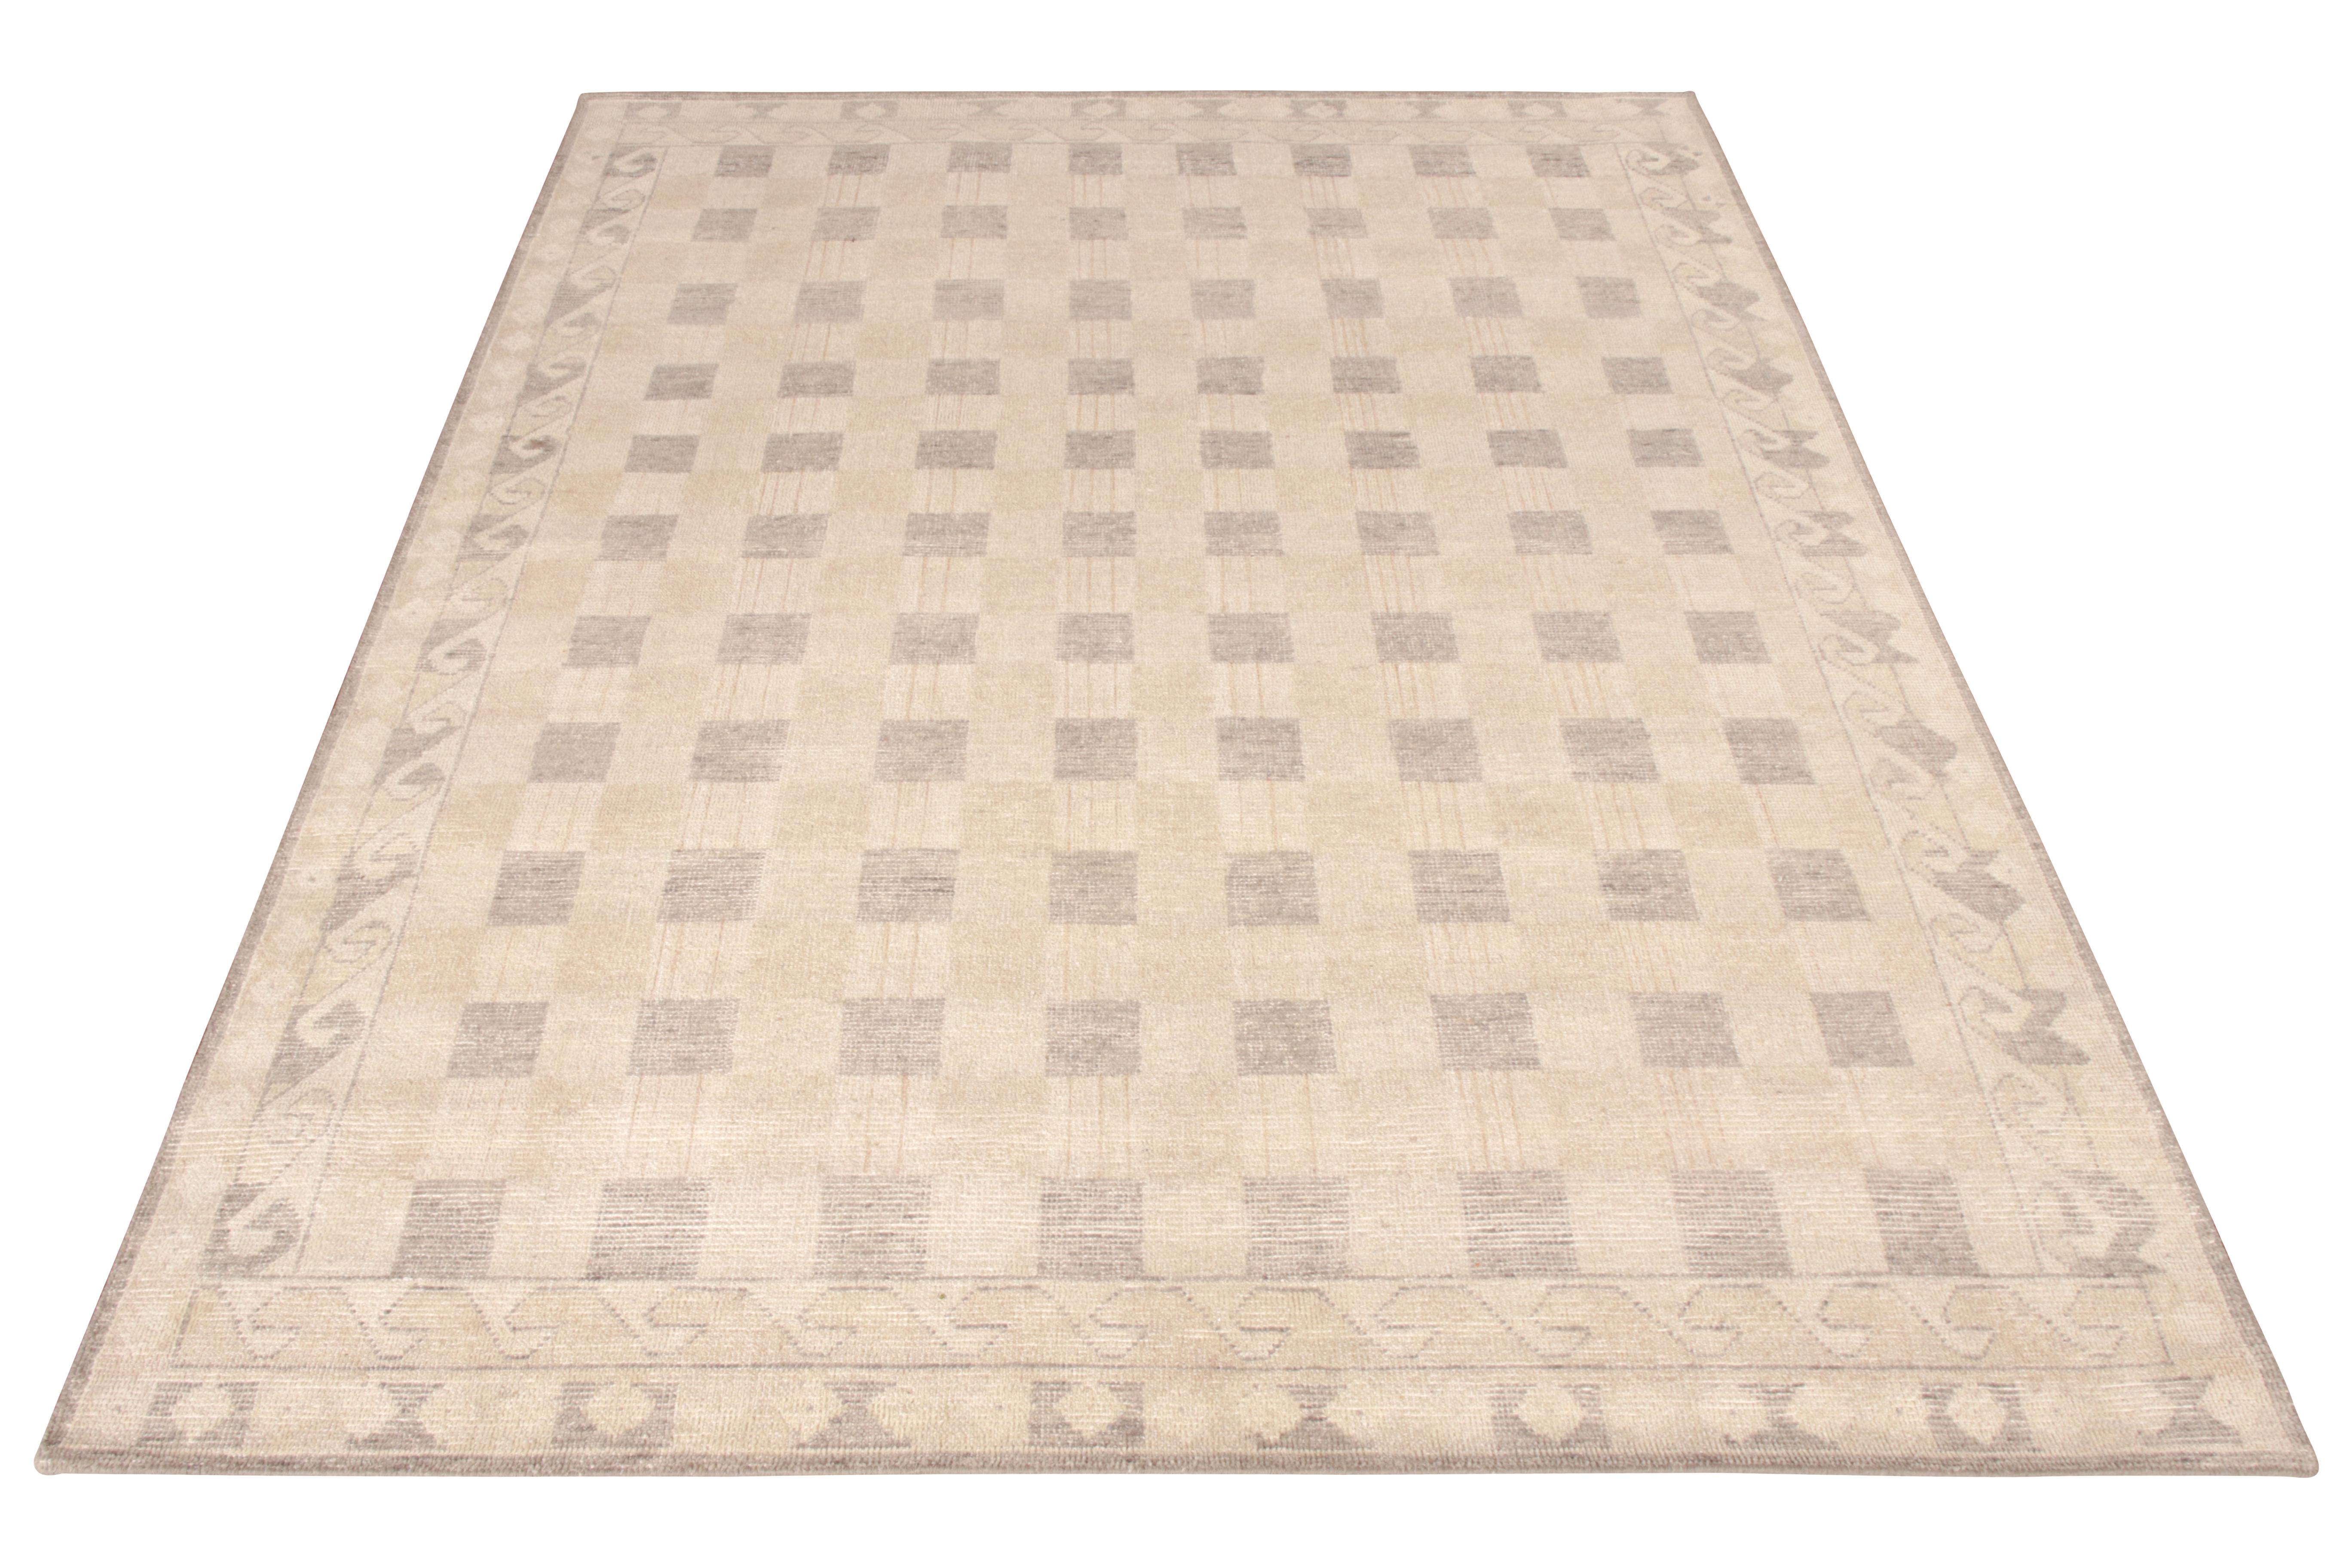 Hand knotted in wool, a beautiful 6 x 8 take on distressed rug styles from Rug & Kilim’s Homage Collection. Inspired by the celebrated Scandinavian rug design and colorway, the rug emanates a shabby chic vibe by blending a subtle ashwood beige-brown